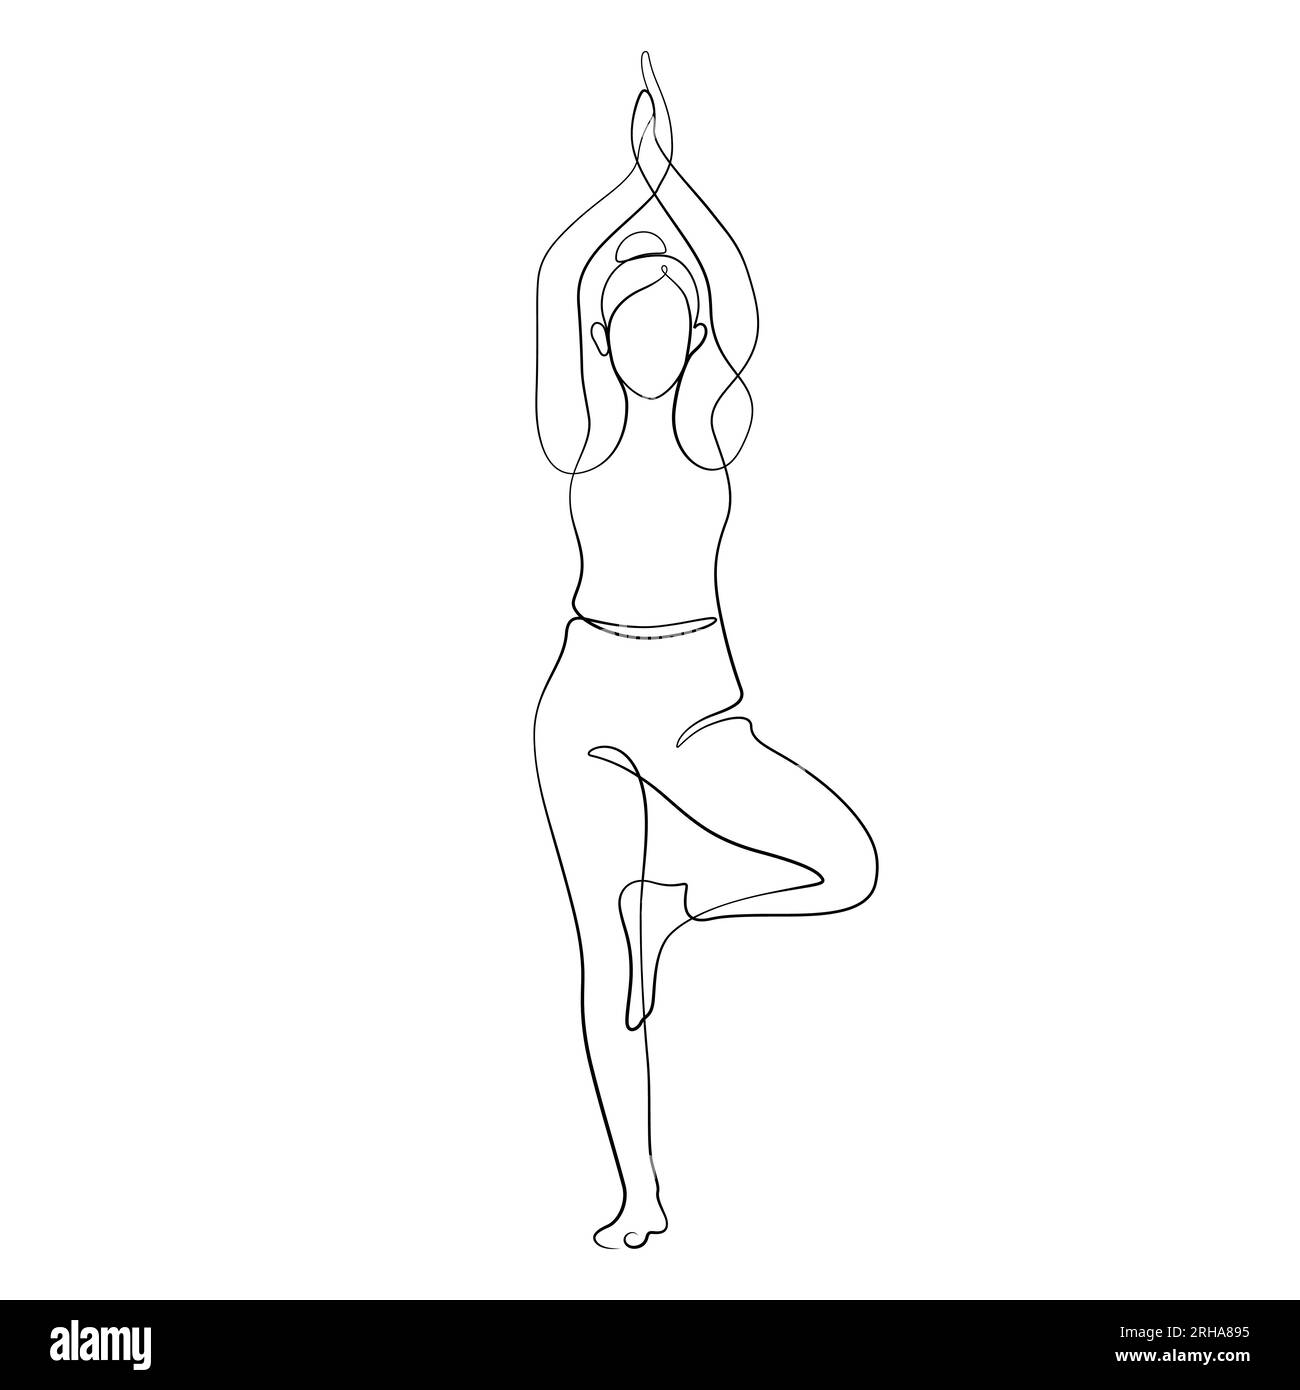 woman doing tree yoga pose healthy exercising in continuous line drawing calligraphic lined minimalist concept 2RHA895